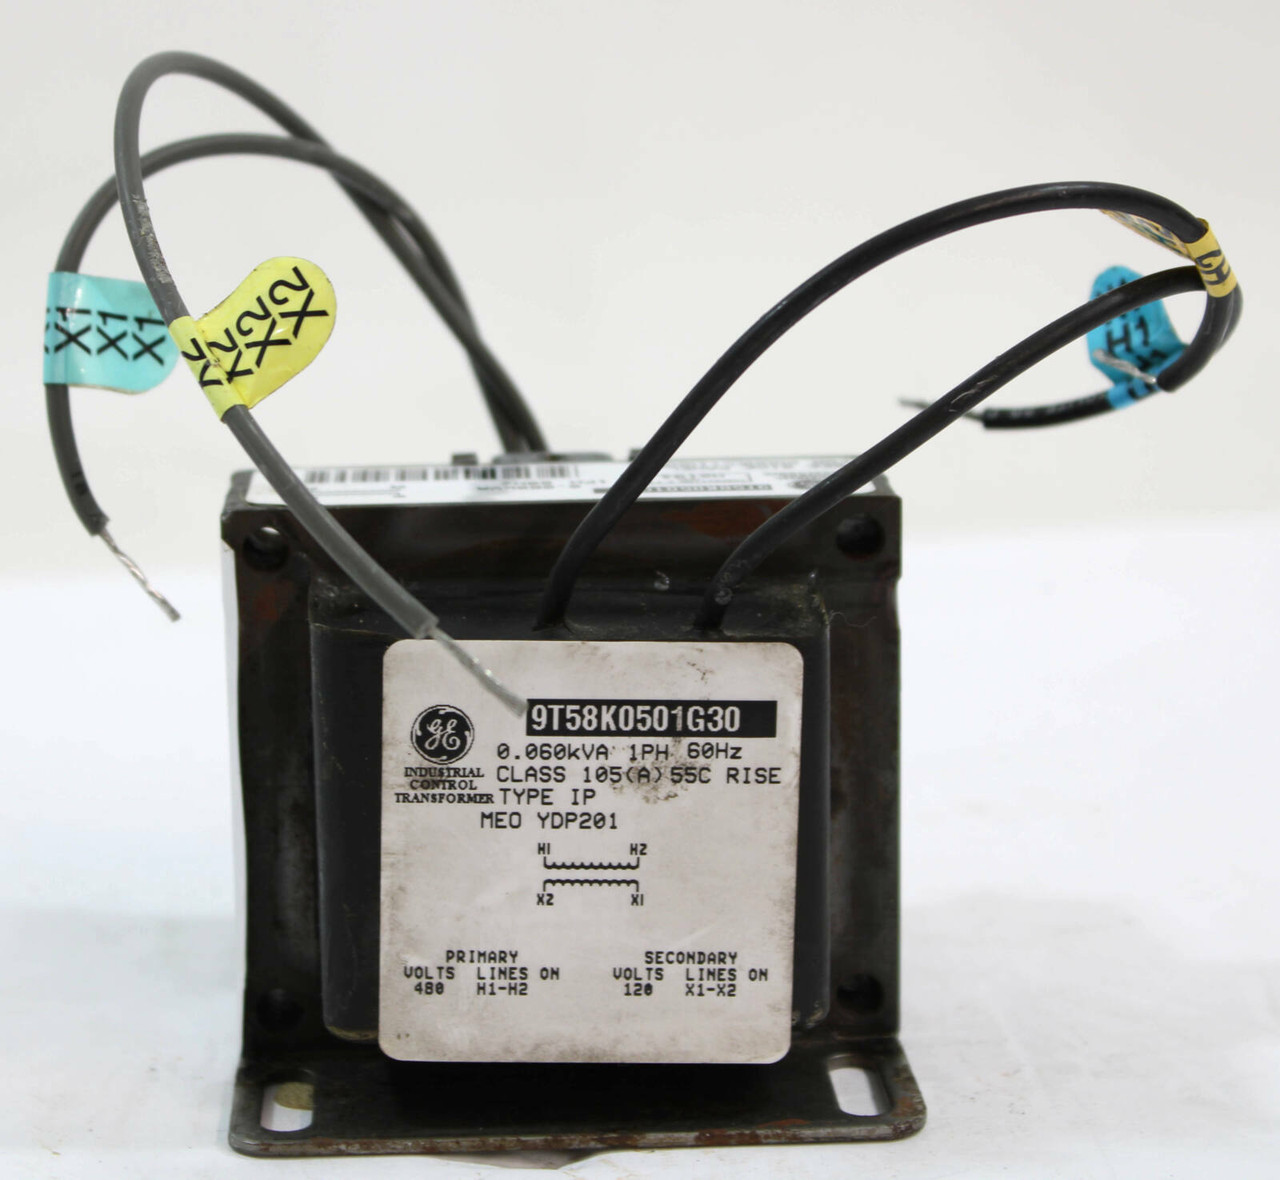 General Electric 9T58K0501G30 Industrial Control Transformer 0.060KVA Primary: 480 Secondary: 120 1 Ph, 60Hz, Class 105(A), 55 Degree C Rise, Type IP, MEO YDP201